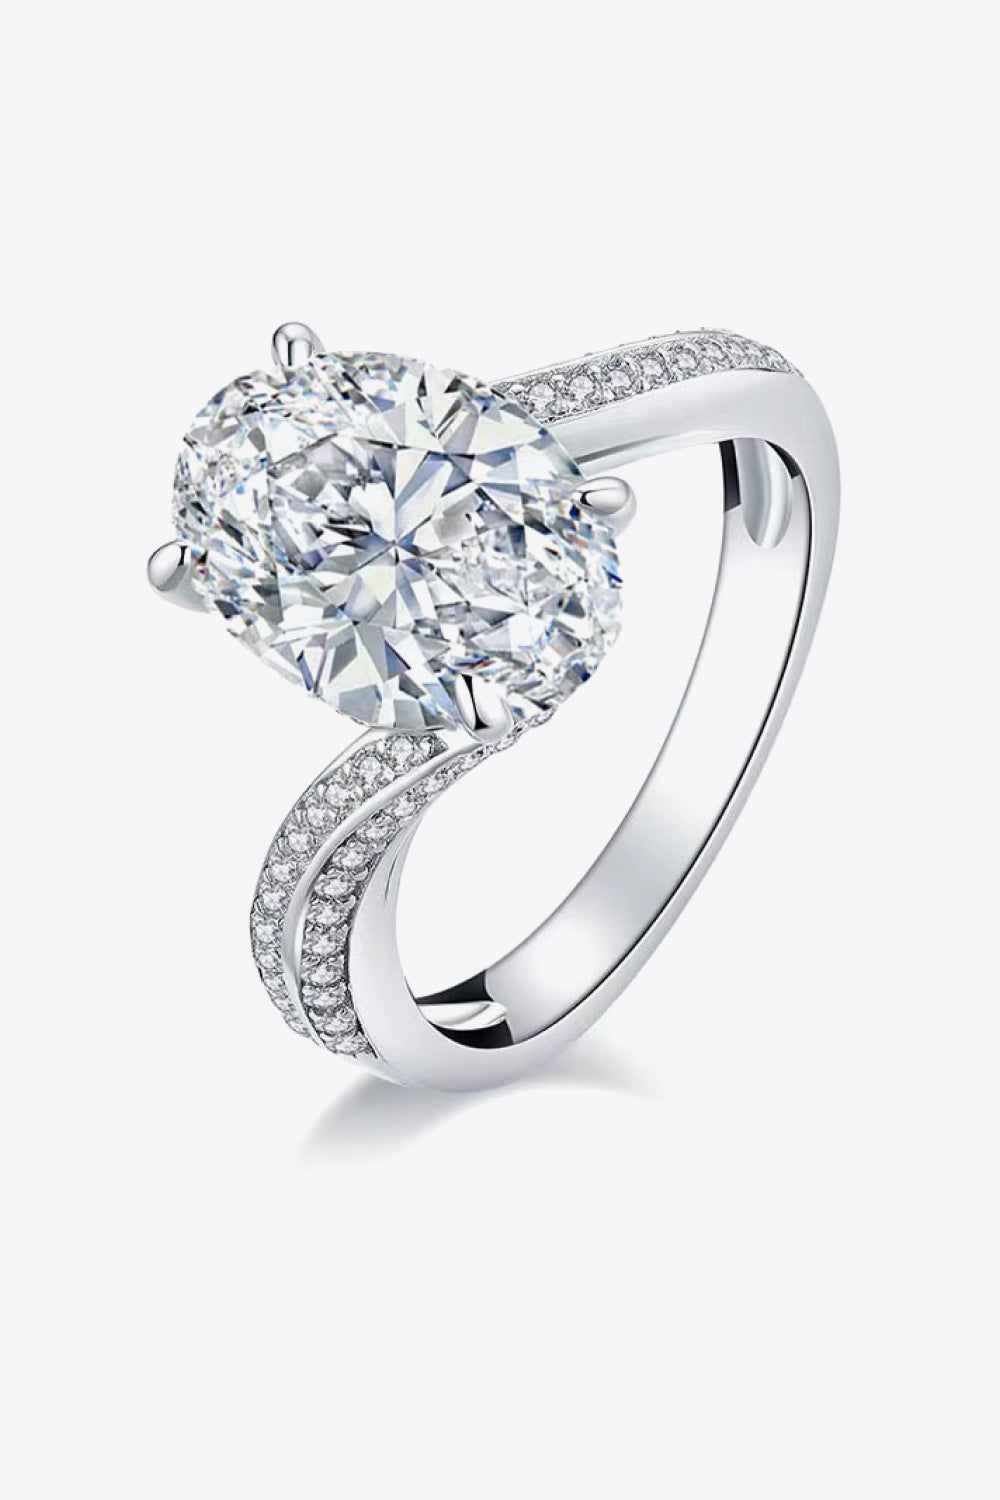 3 Carat Moissanite Side Stone Ring - Rings - FITGGINS